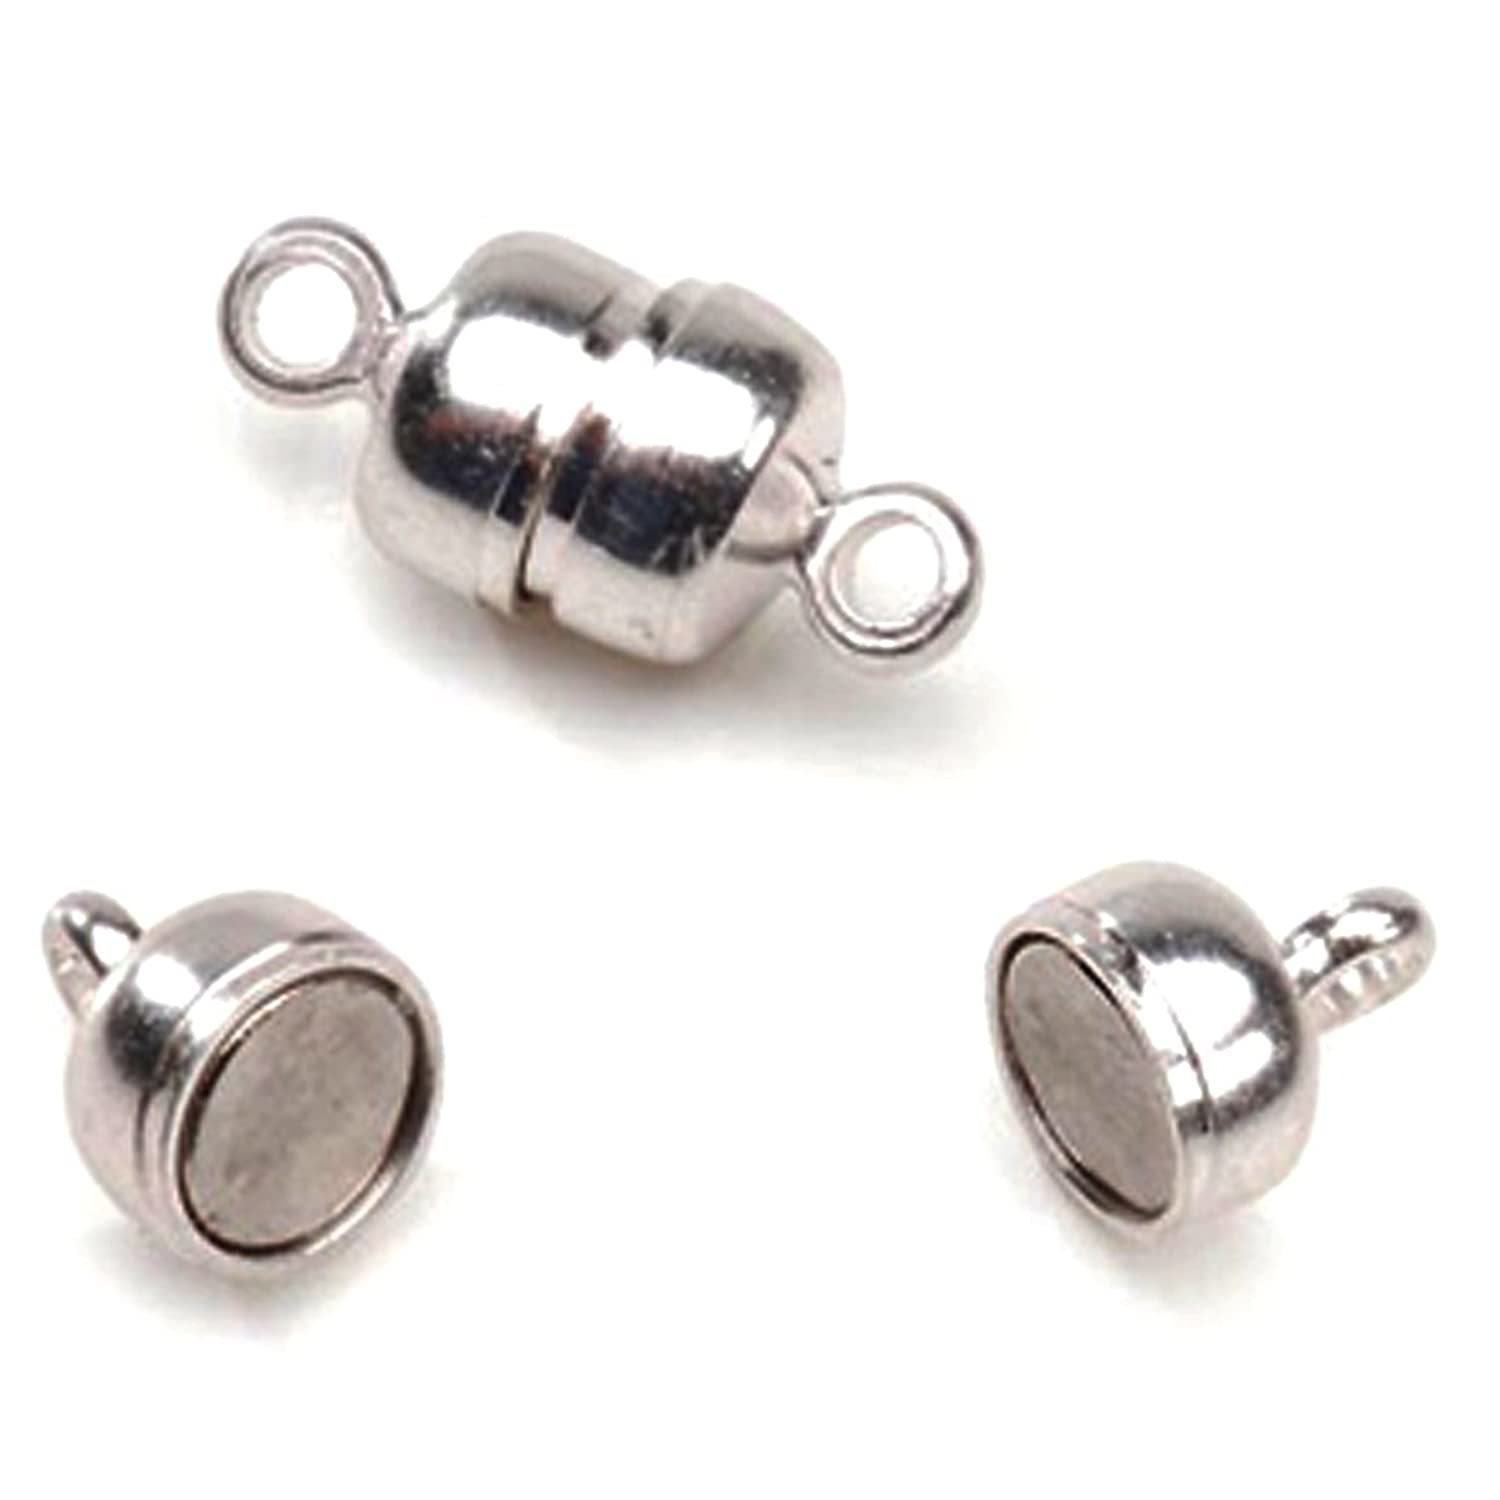 Mgrt Products - Magnetic clasps 5mmx11mm 5/pkg-silver